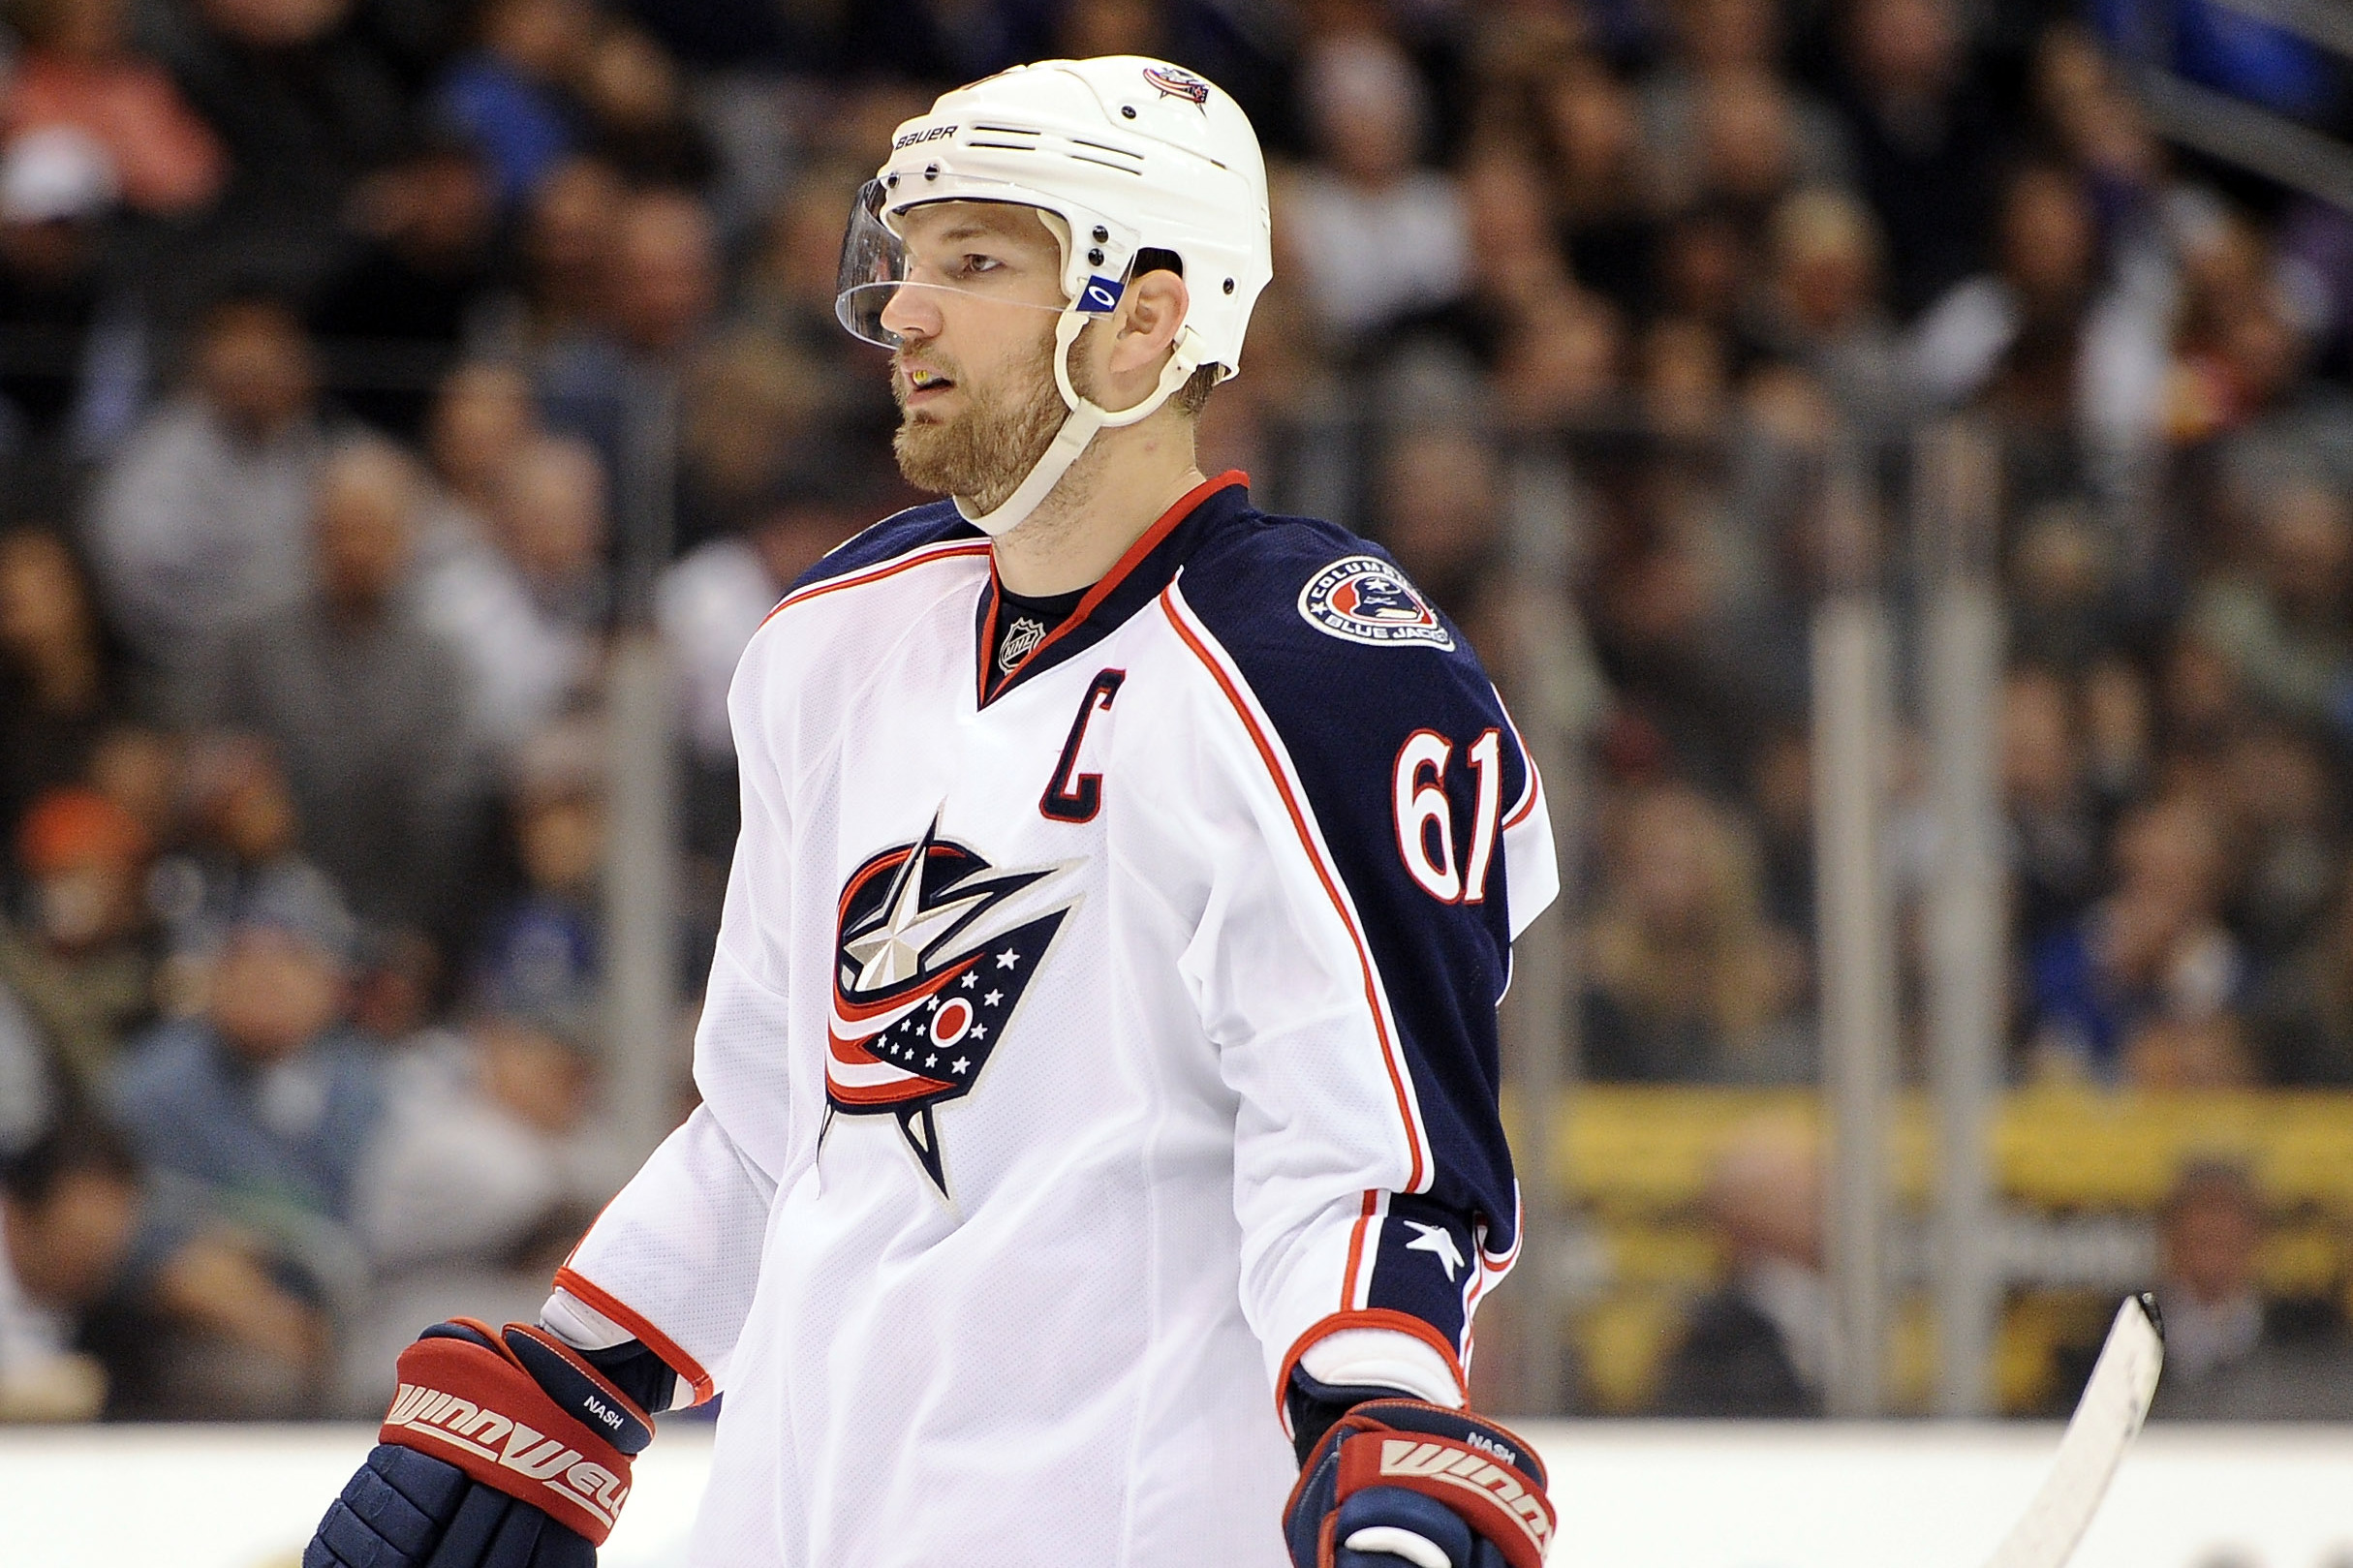 NHL Trade Rumors: Rick Nash Not The Answer For Capitals' Woes